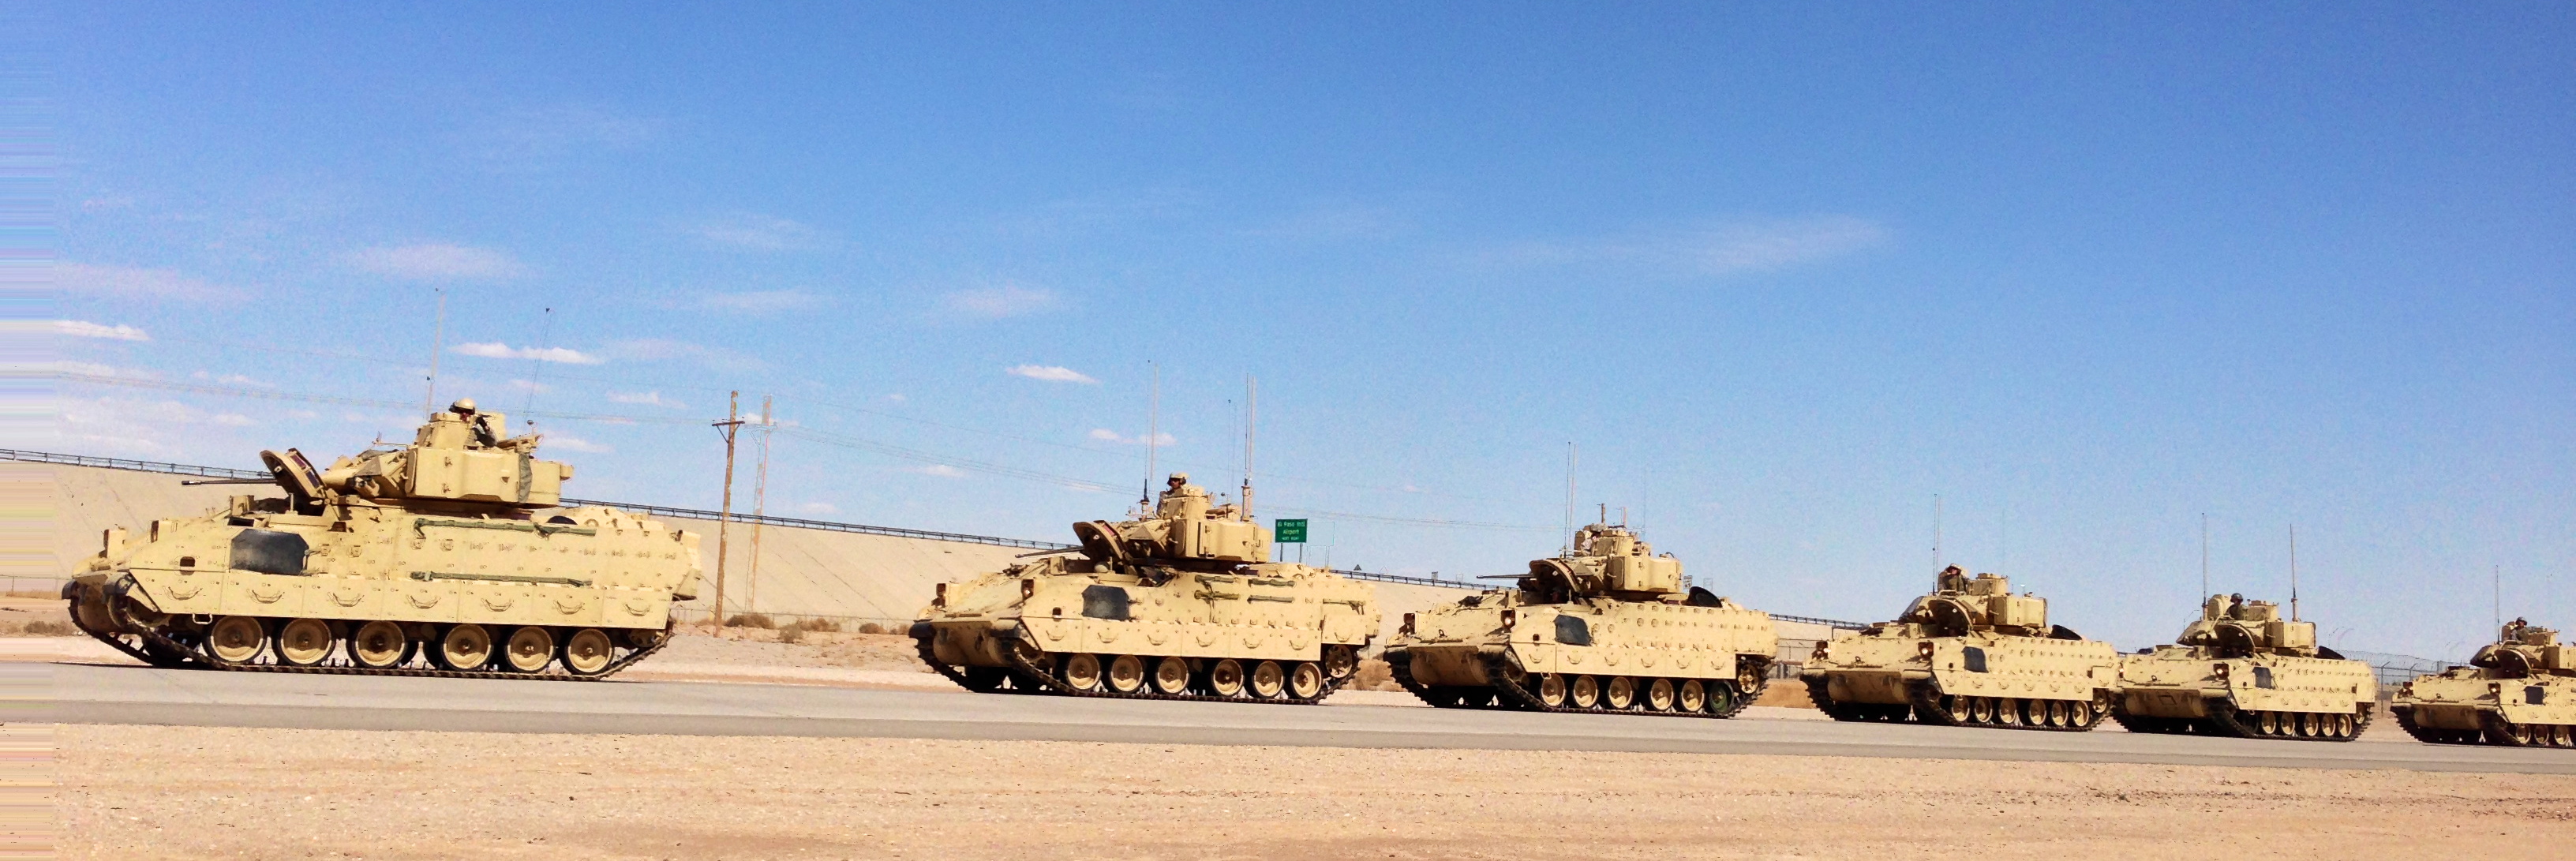 a large fleet of tanks traveling down a road